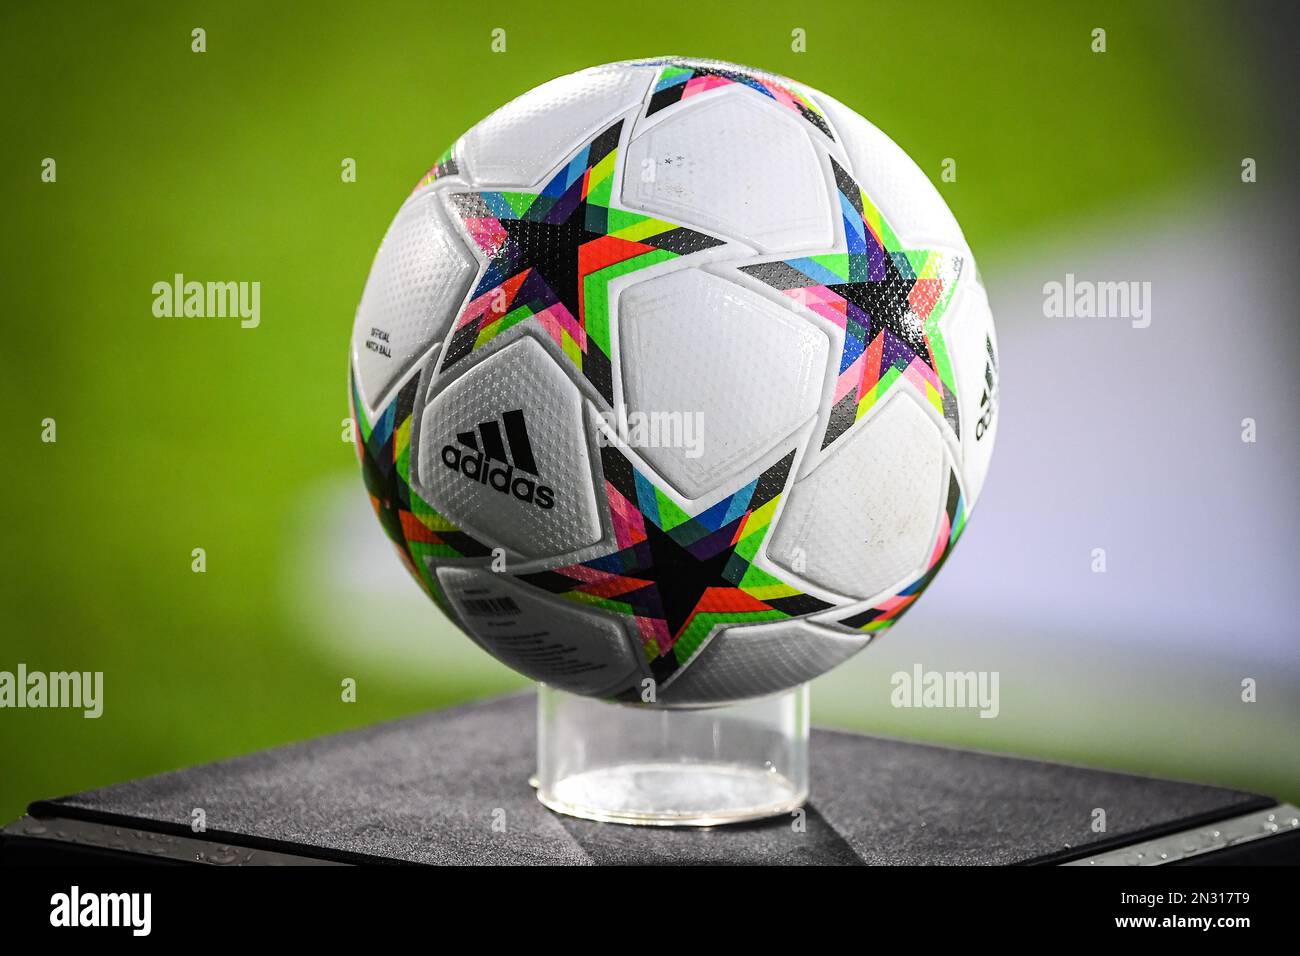 Illustration of the Adidas match ball during the UEFA Champions League,  Group B football match between Club Brugge (Club Bruges KV) and Bayer 04  Leverkusen on September 7, 2022 at Jan Breydelstadion